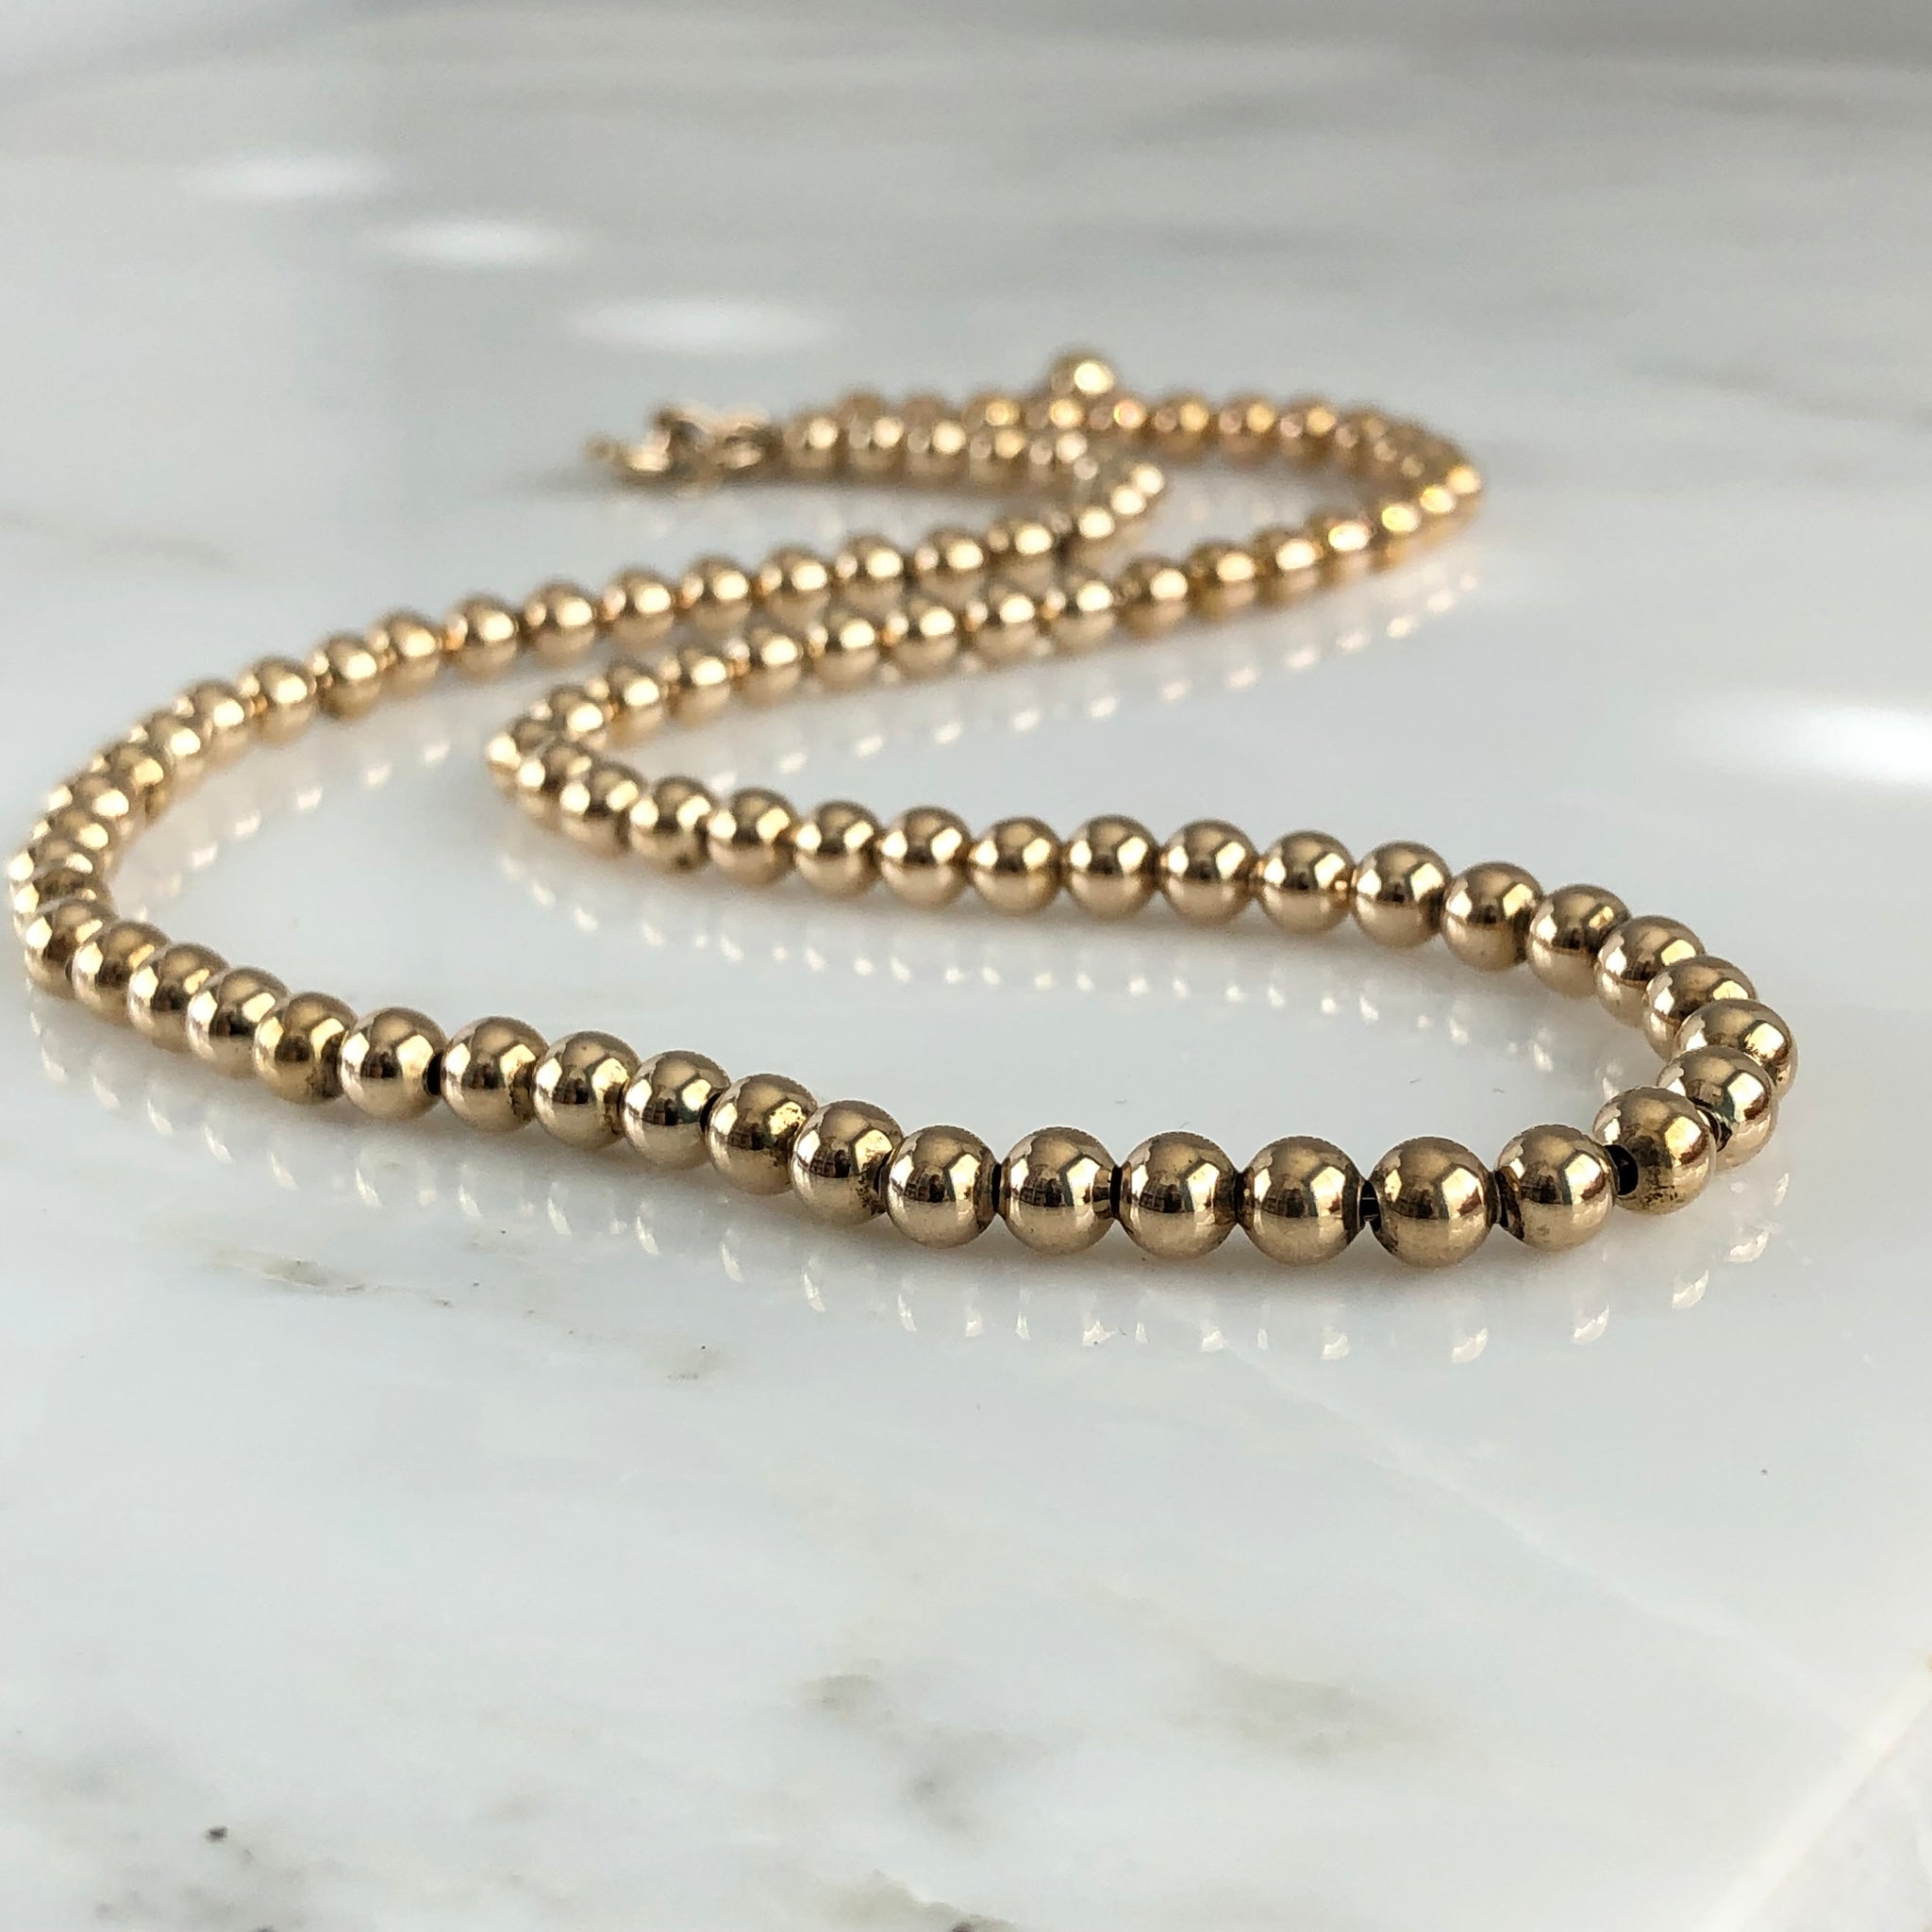 Buy 22K Gold Beads Strand Necklace Fine Jewelry 4mm Online in India - Etsy  | Gold bead necklace, Silver bangle bracelets, Sterling silver bangle  bracelets